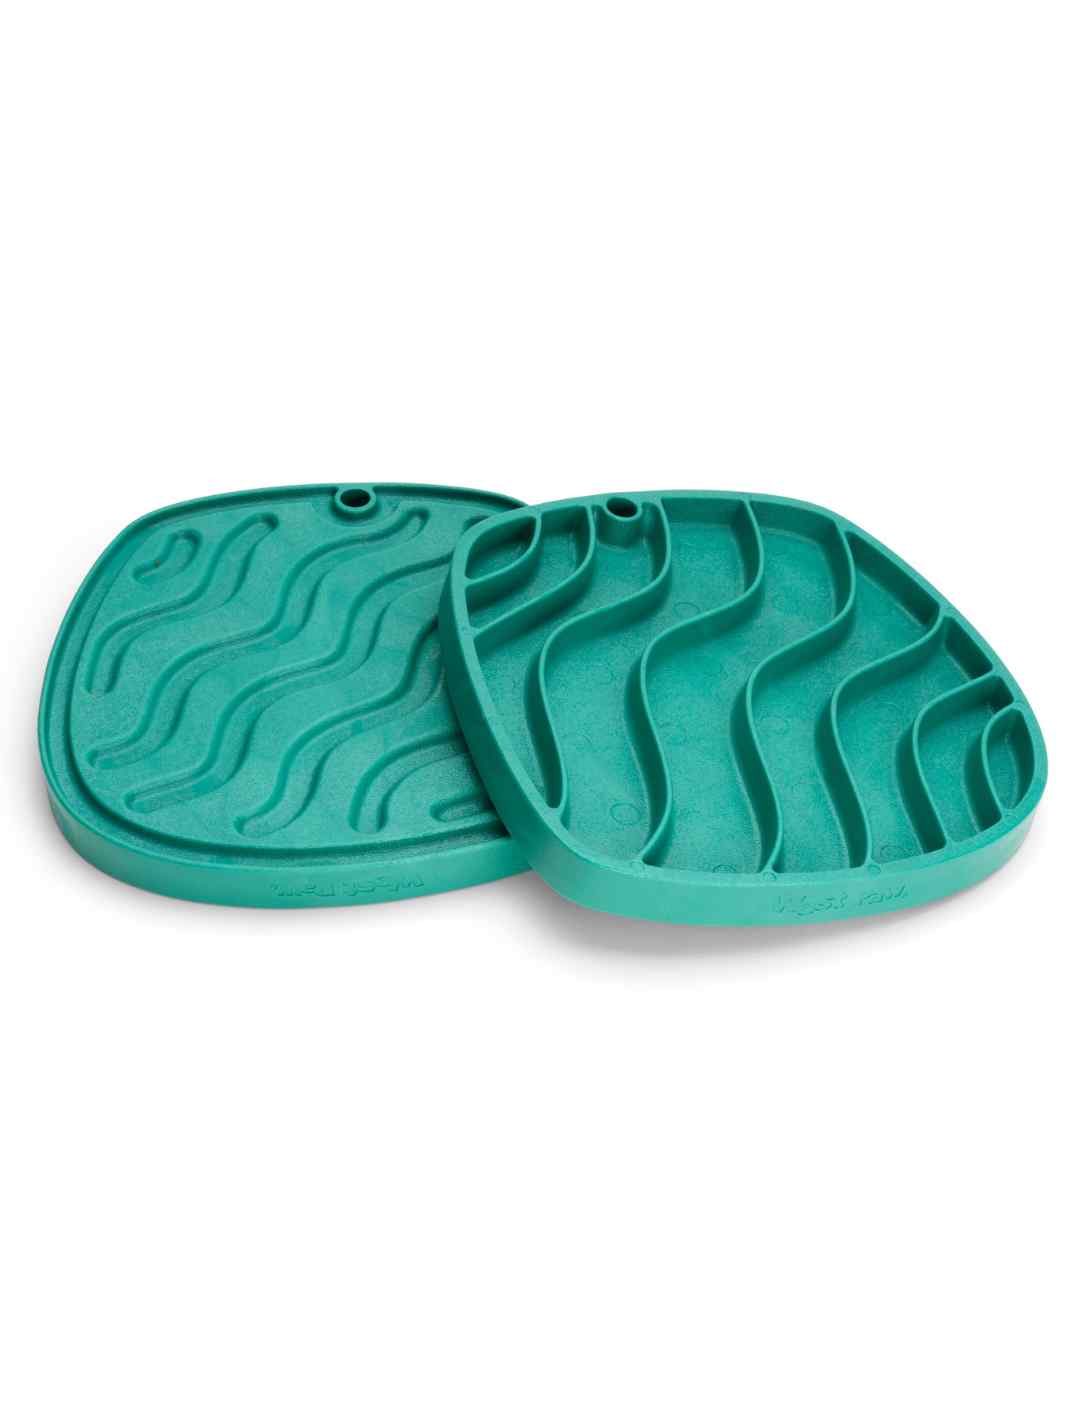 West Paw Feast Lick Mat and Slow Feeder with Green Waves